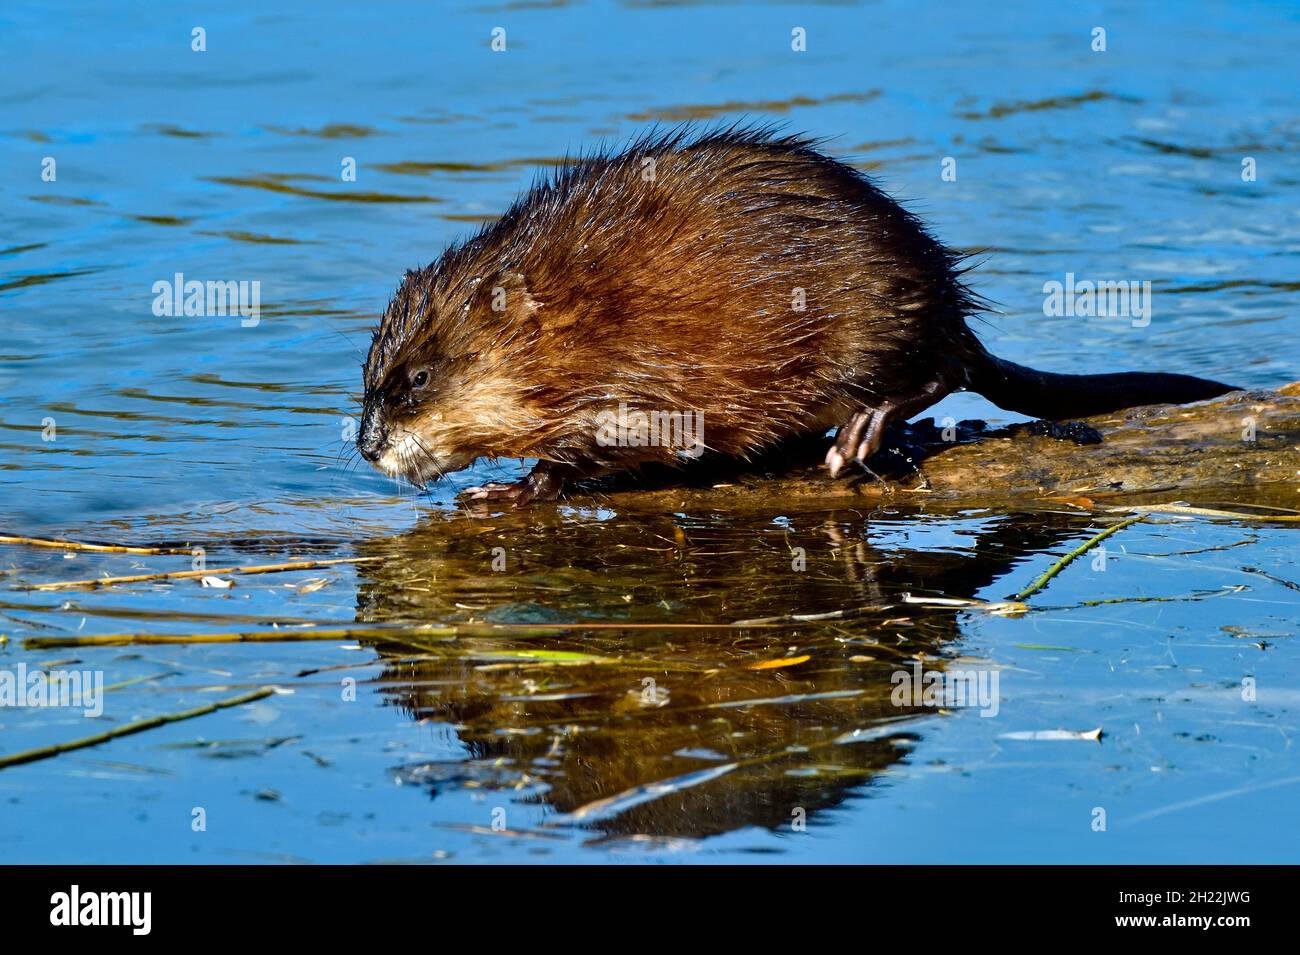 A side view of a wild Muskrat ' Ondatra zibethicus' walking on a sunken tree in a beaver pond in rural Alberta Canada Stock Photo